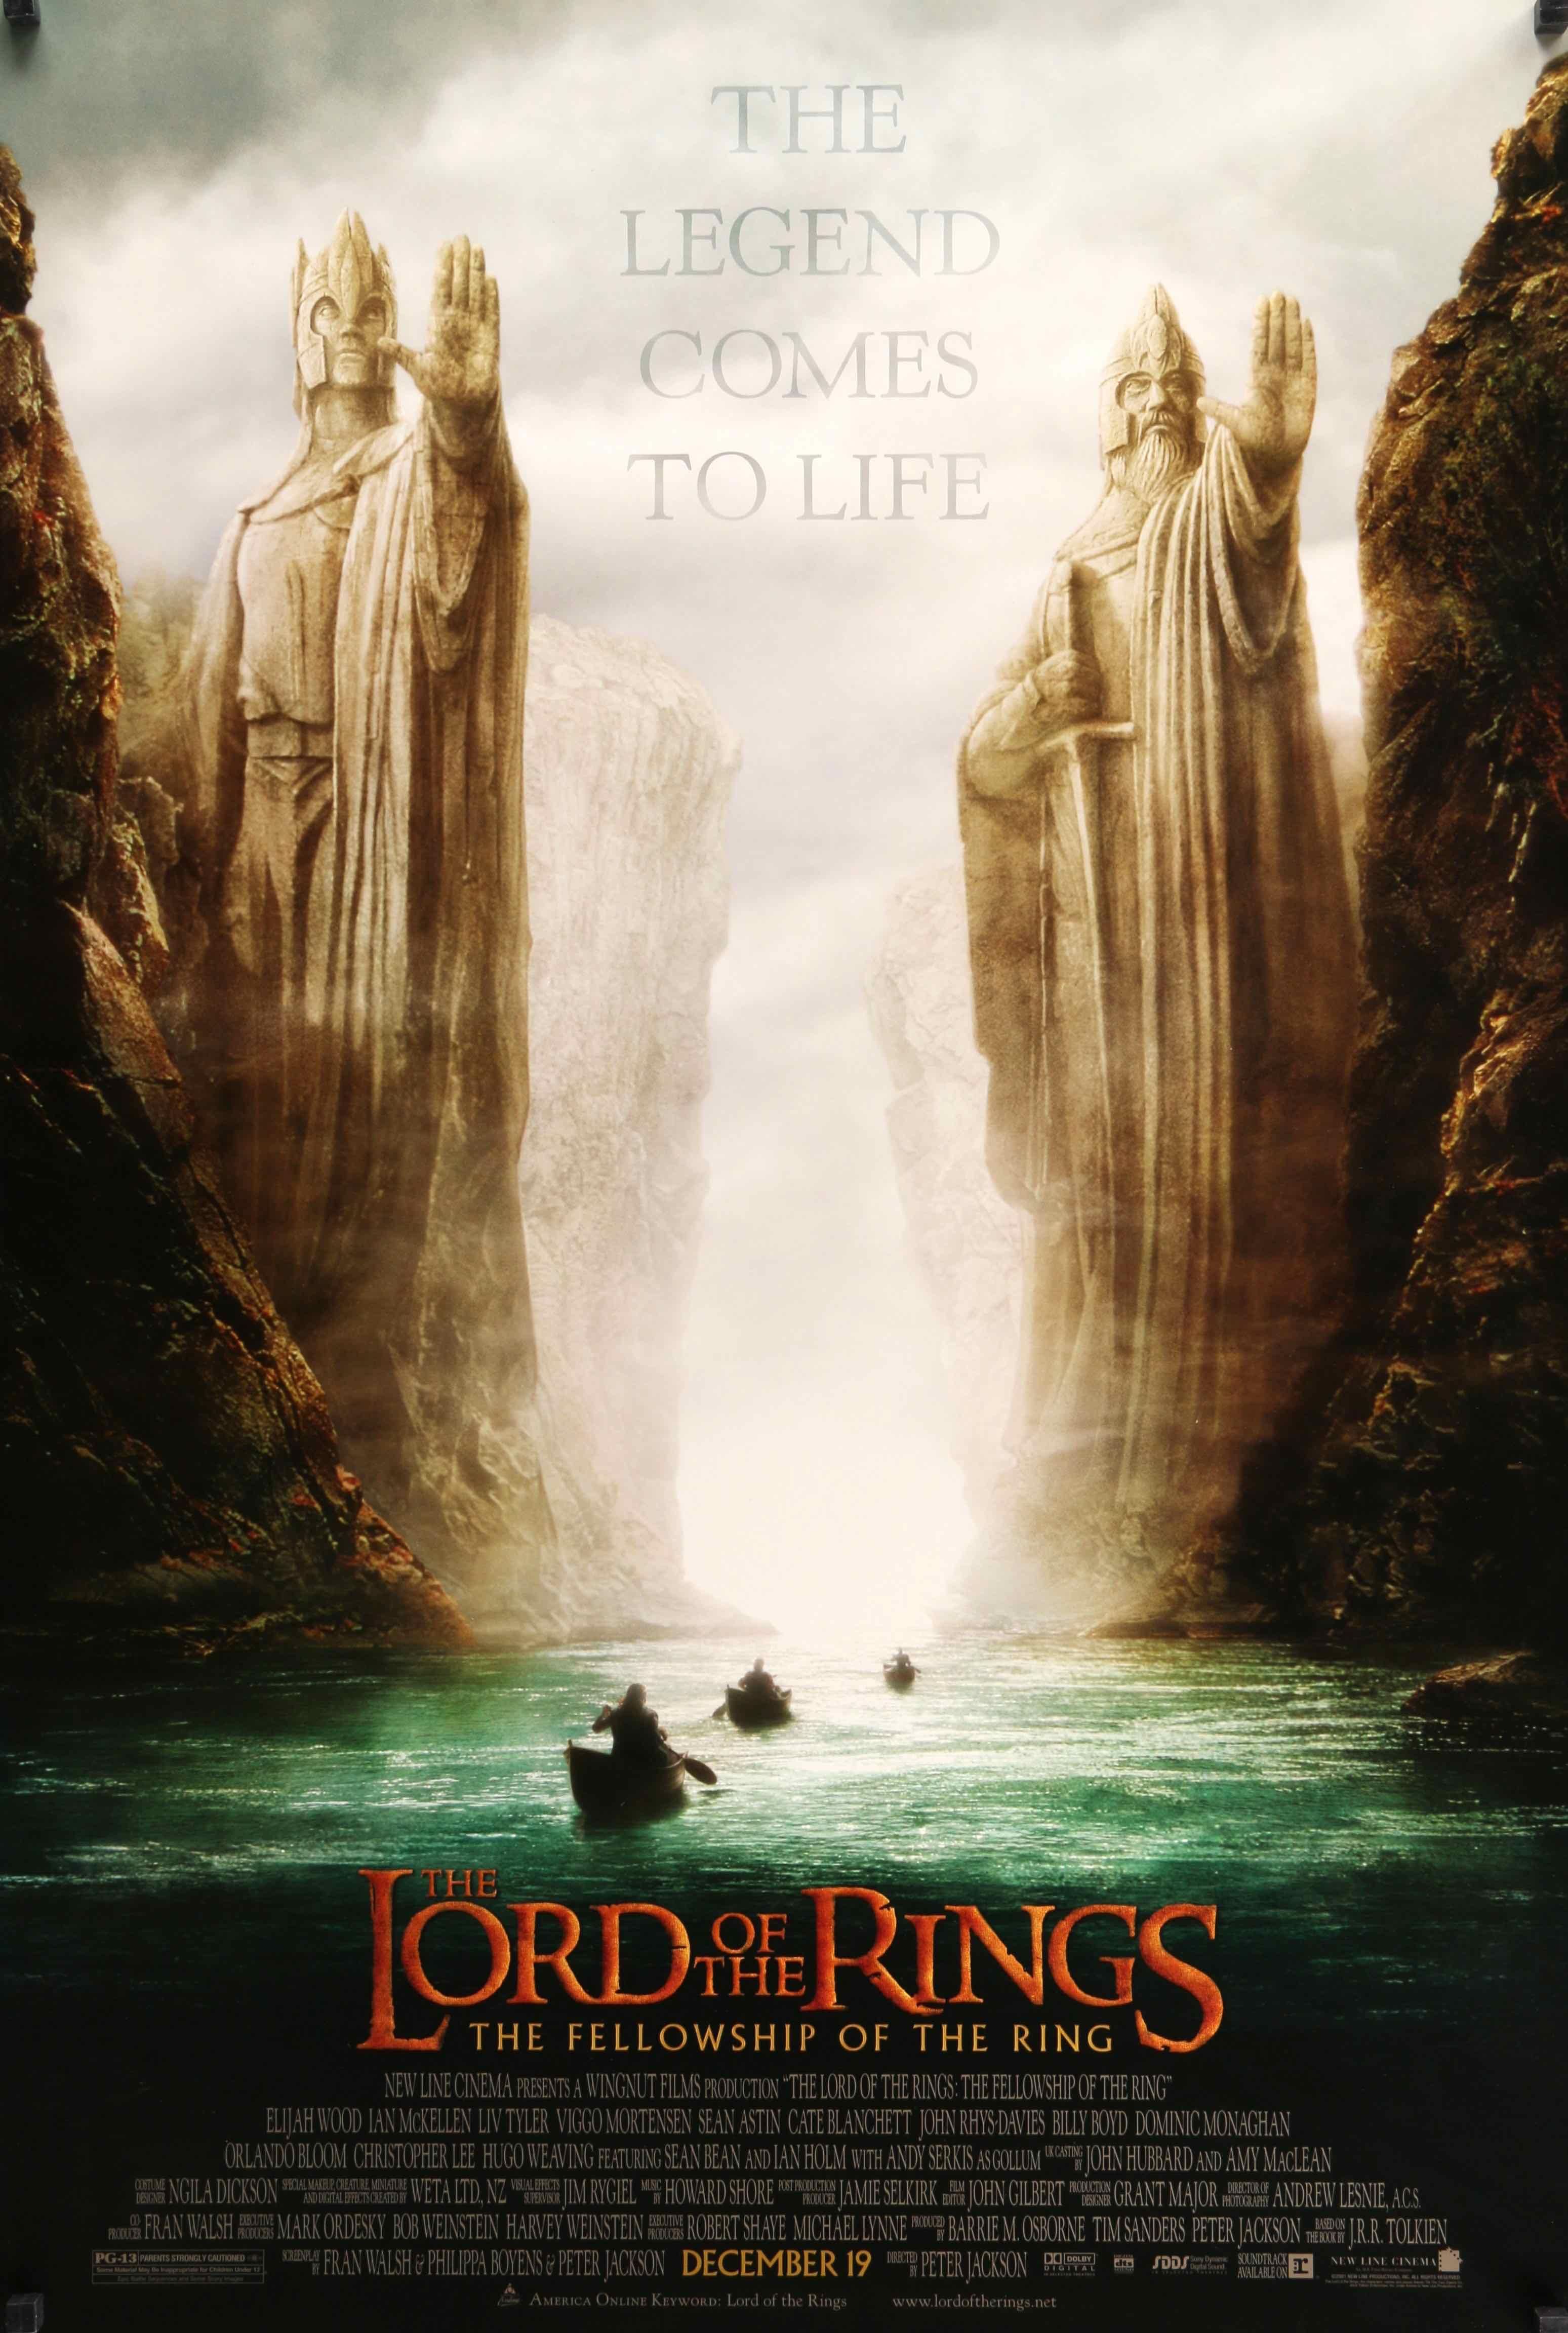 Lord of the Rings: The Fellowship of the Ring (2001) HD Wallpaper